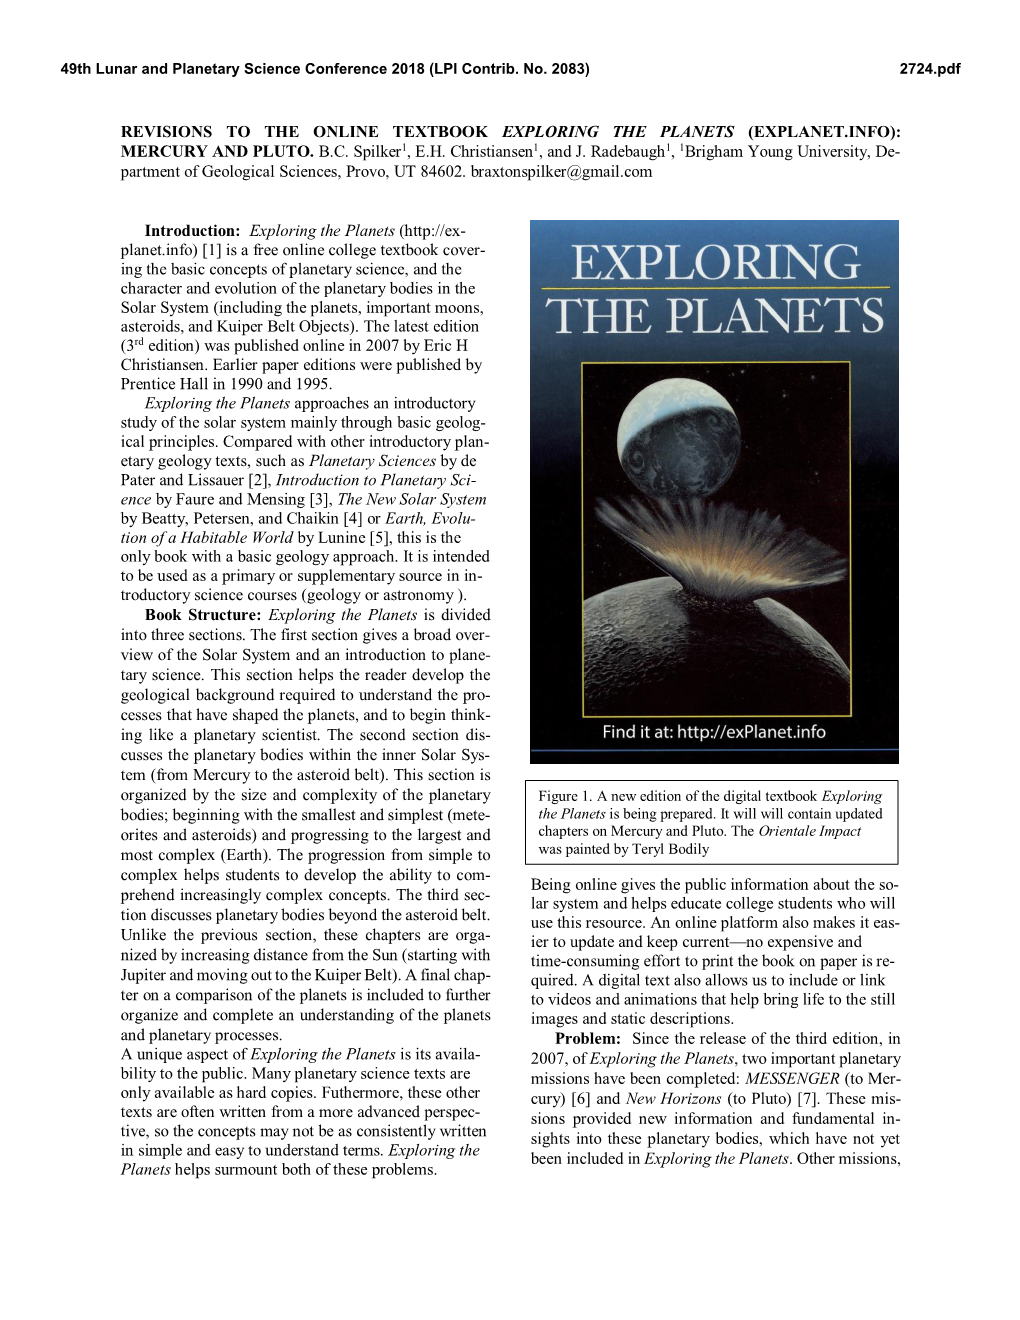 Revisions to the Online Textbook Exploring the Planets (Explanet.Info): Mercury and Pluto